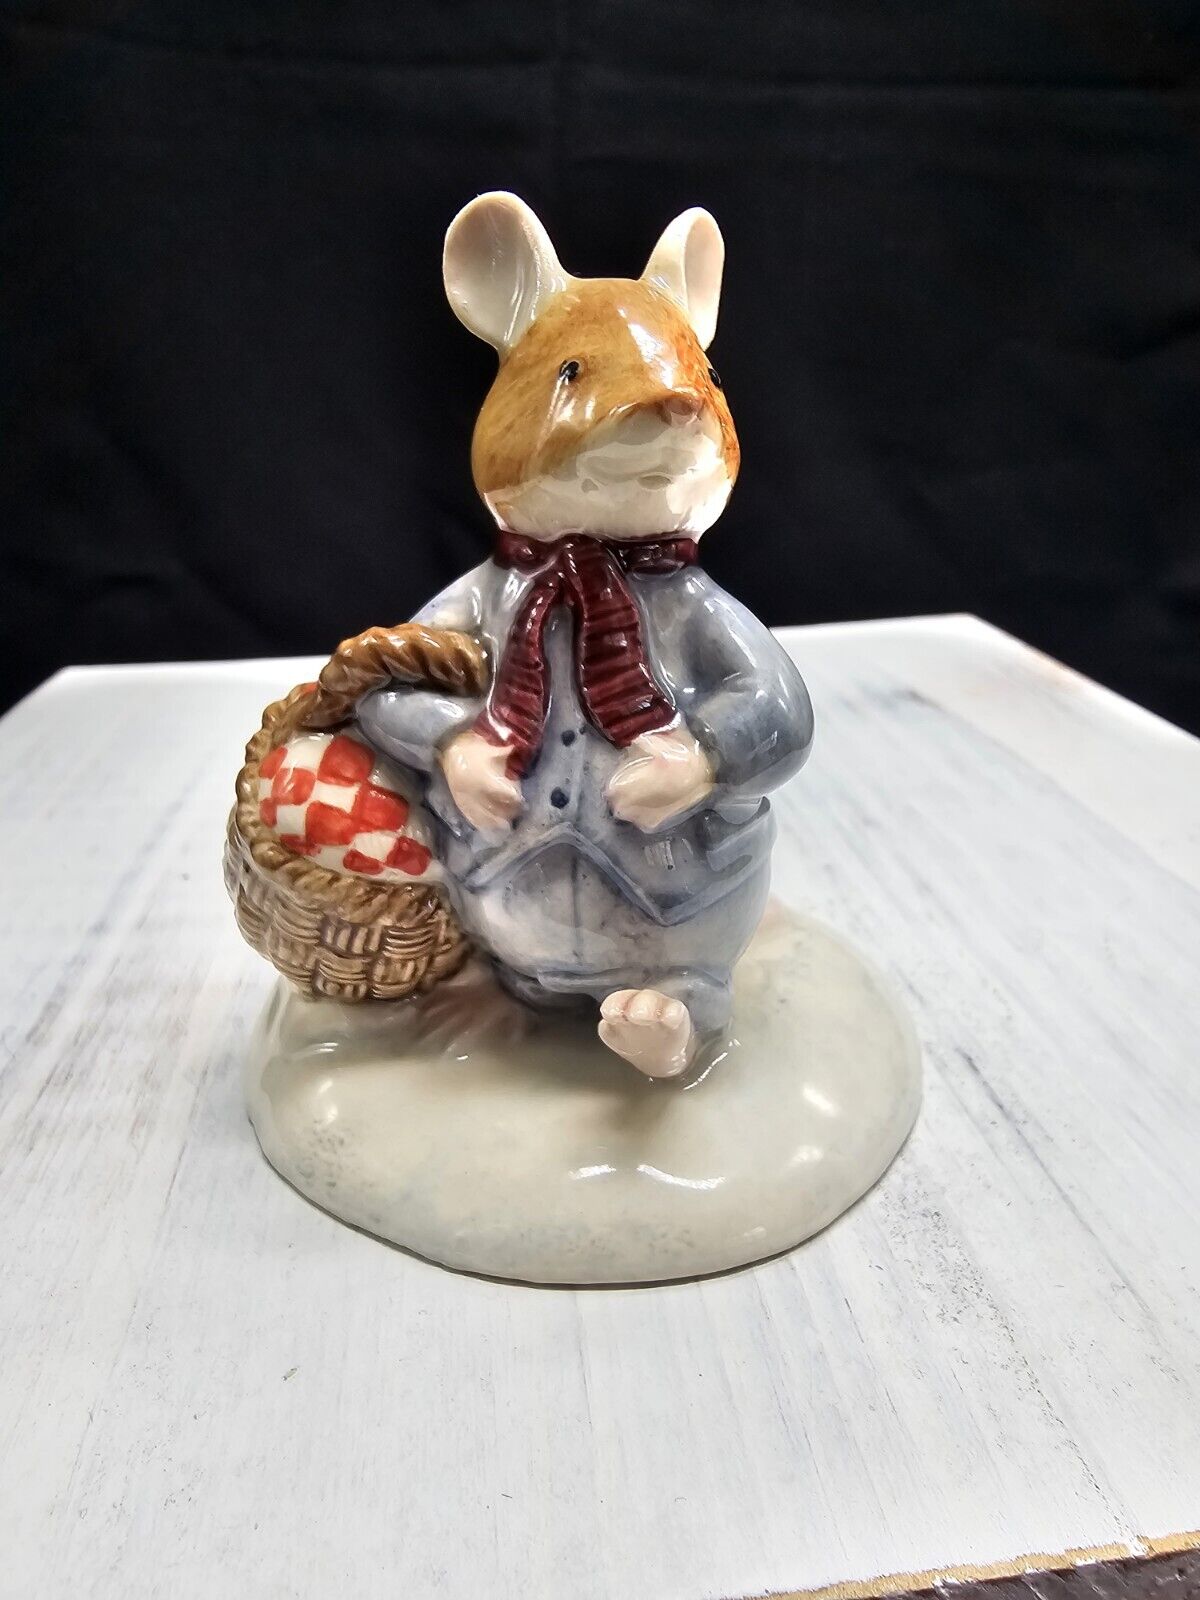 Brambly Hedge Wilfred Carries the Picnic 2000  Figurine by Royal Doulton DBH 34